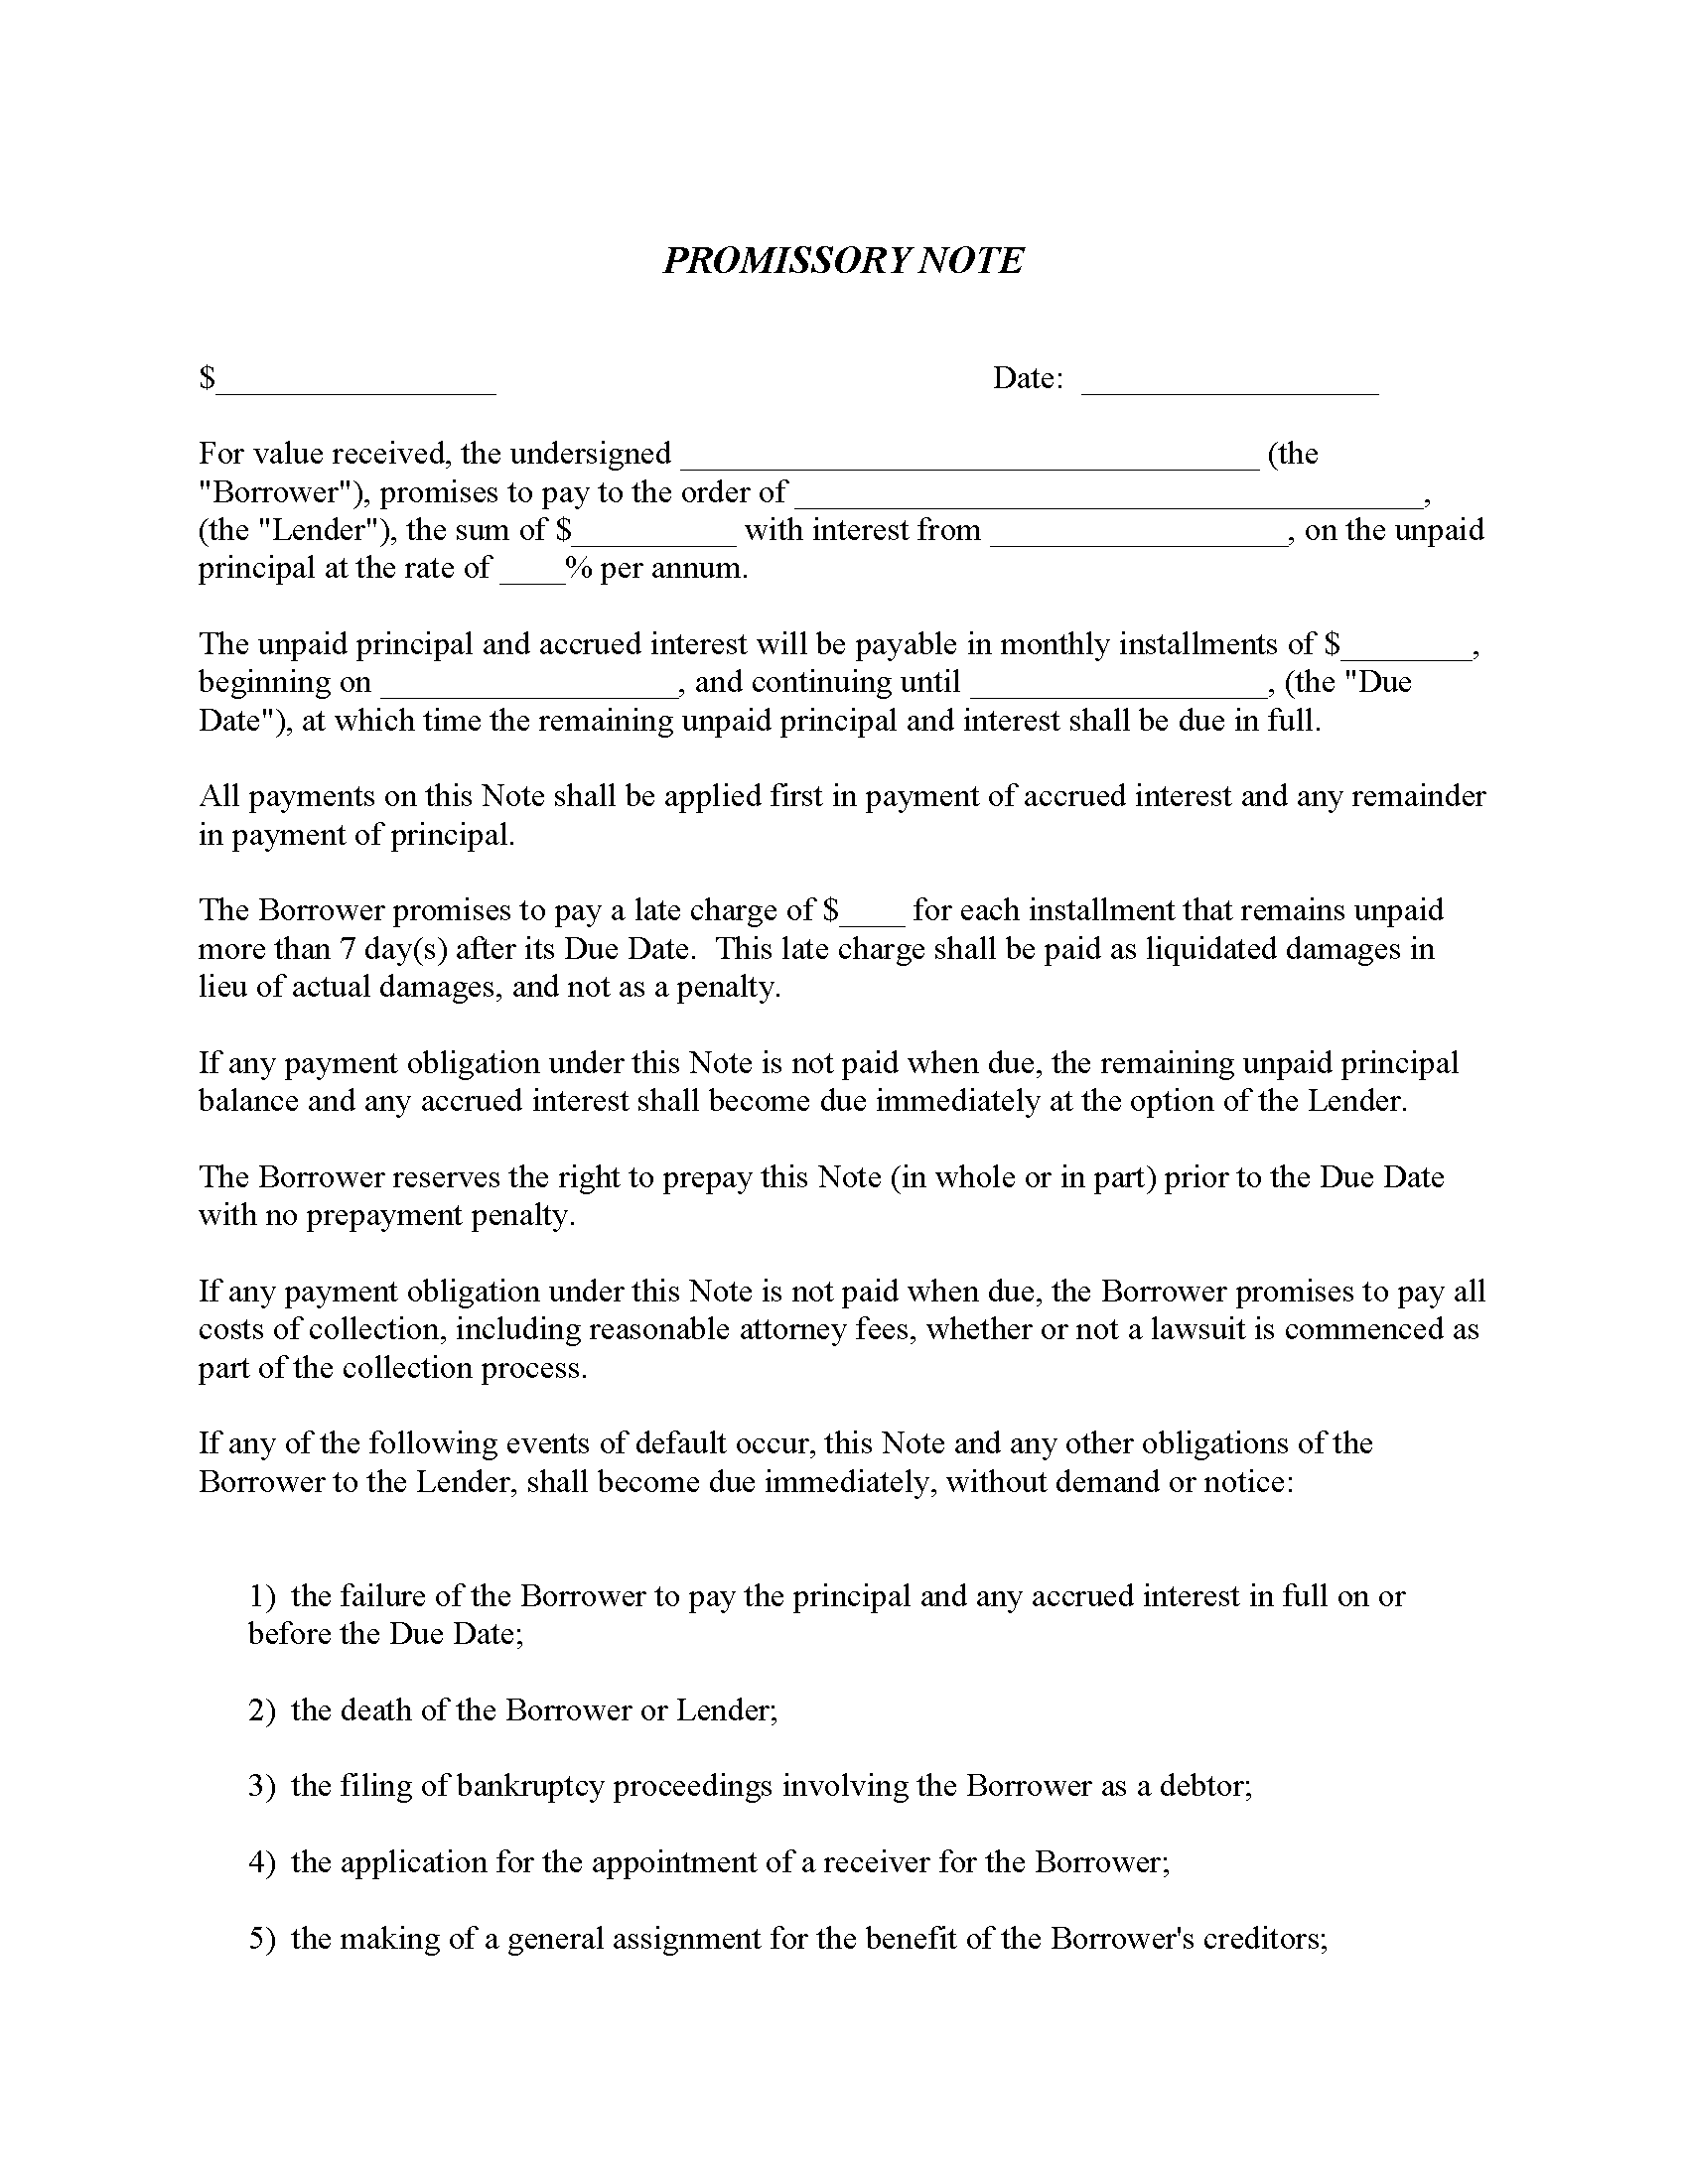 promissory-notes-printable